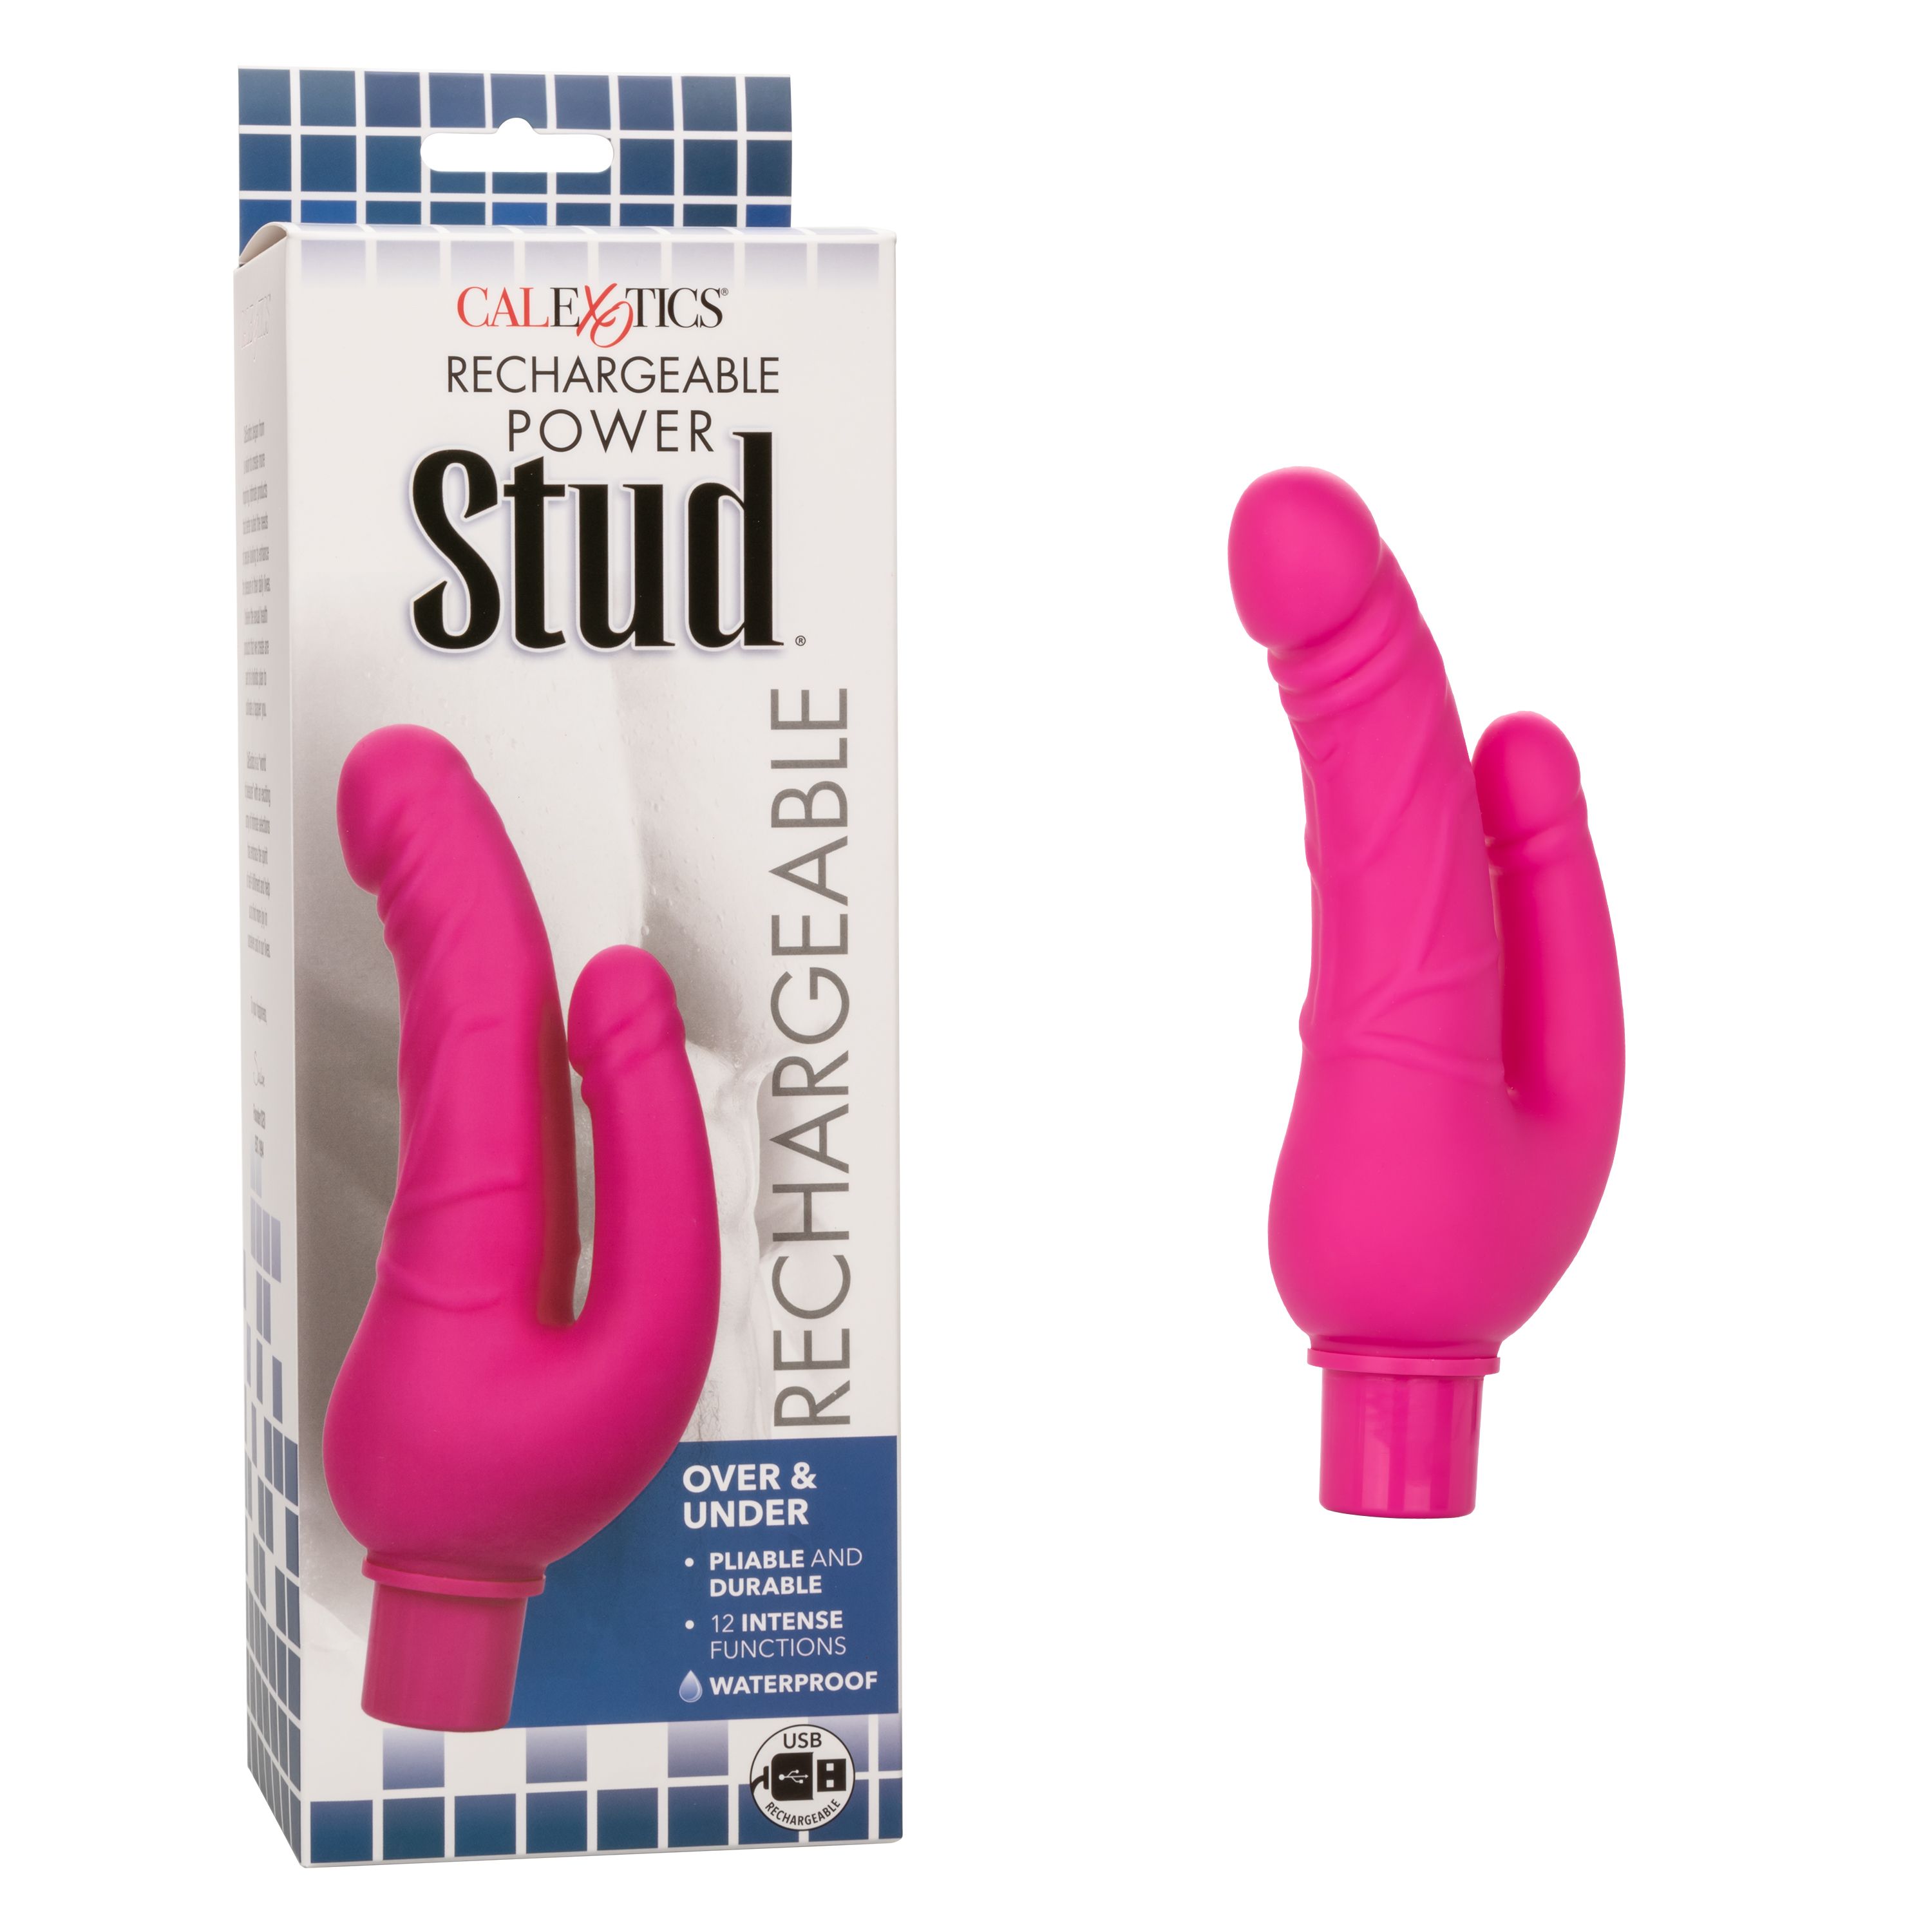 RECHARGEABLE POWER STUD OVER & UNDER PINK - SE084255